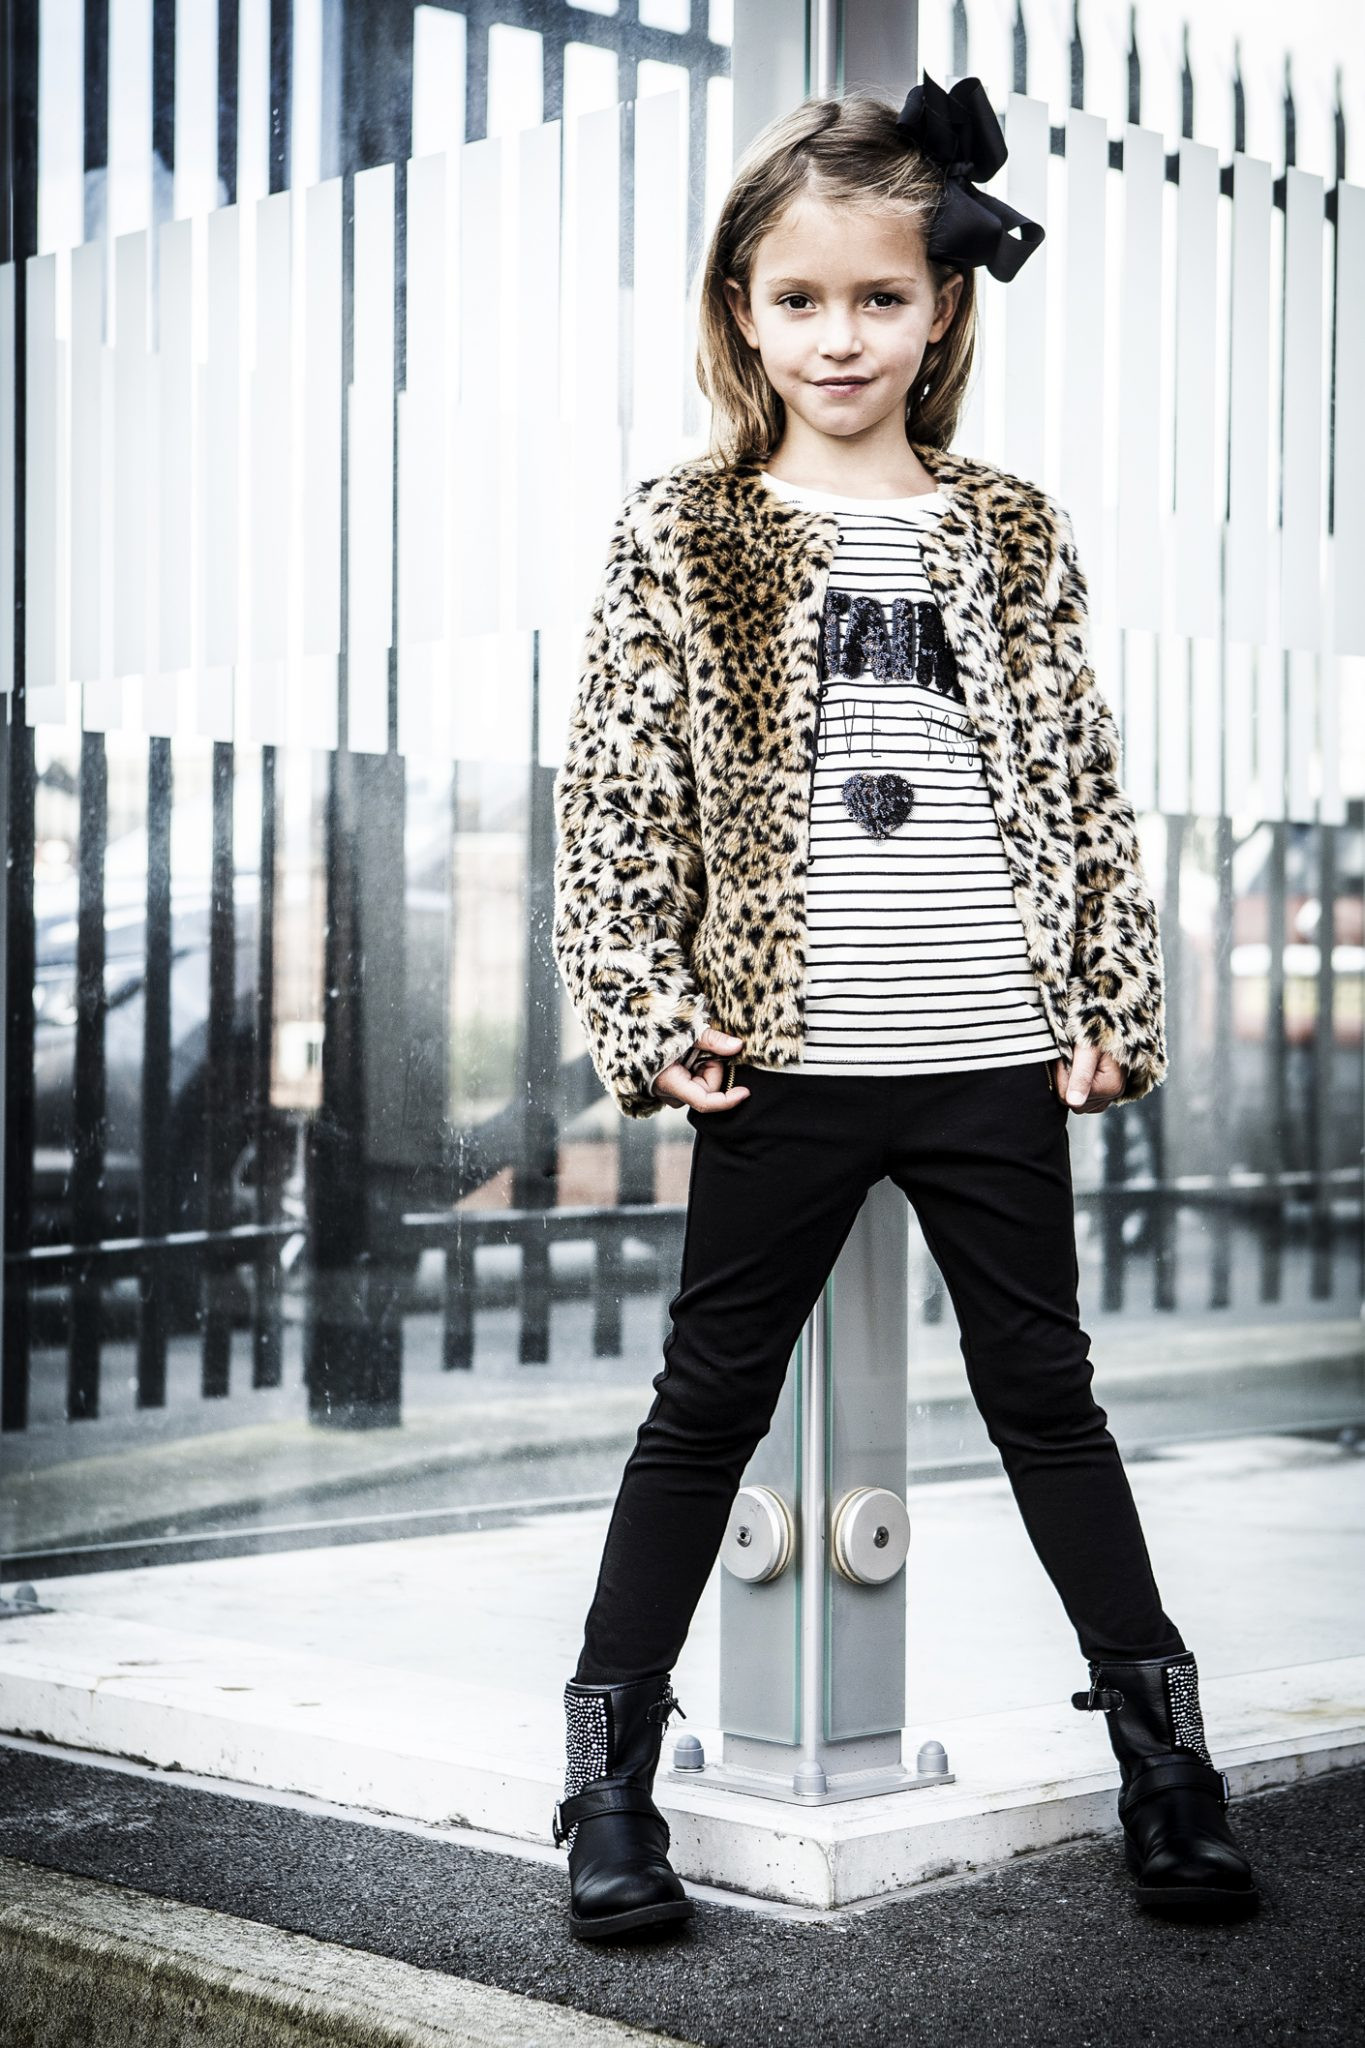 Kids Fashion Photography
 kids fashion photography shot on location in Manchester